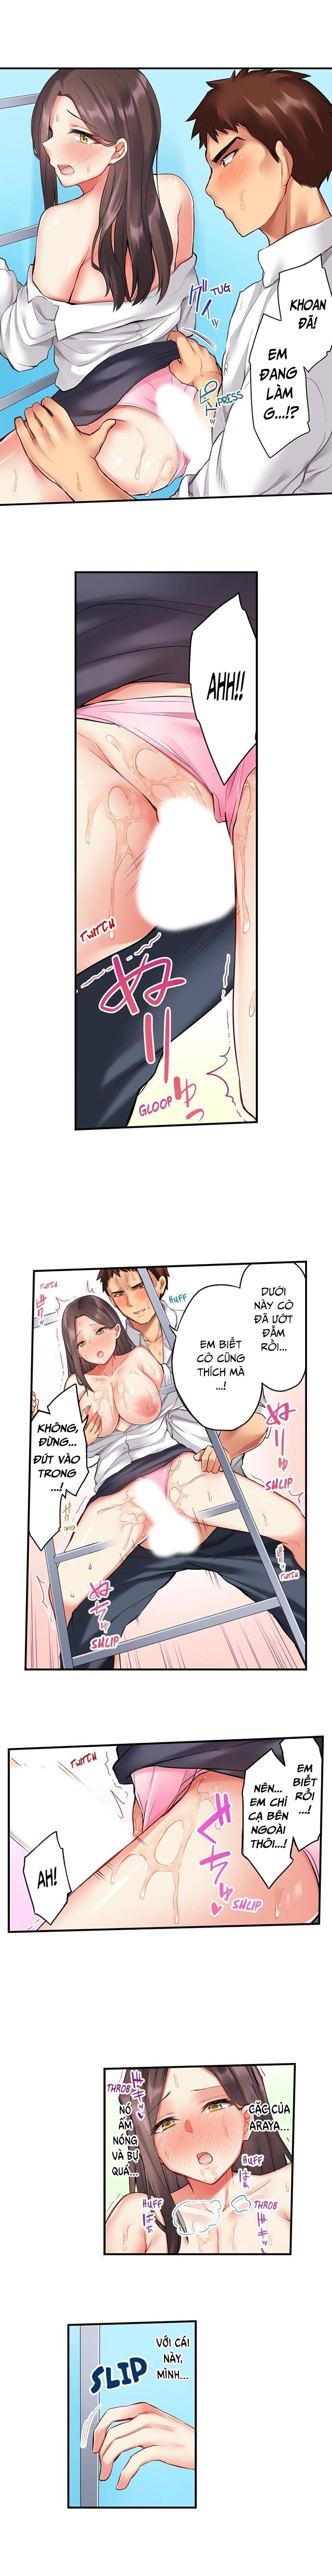 Xem ảnh If I See Your Boobs, There’s No Way I Won’t Lick Them - Chapter 5 - 1624033687642_0 - Hentai24h.Tv